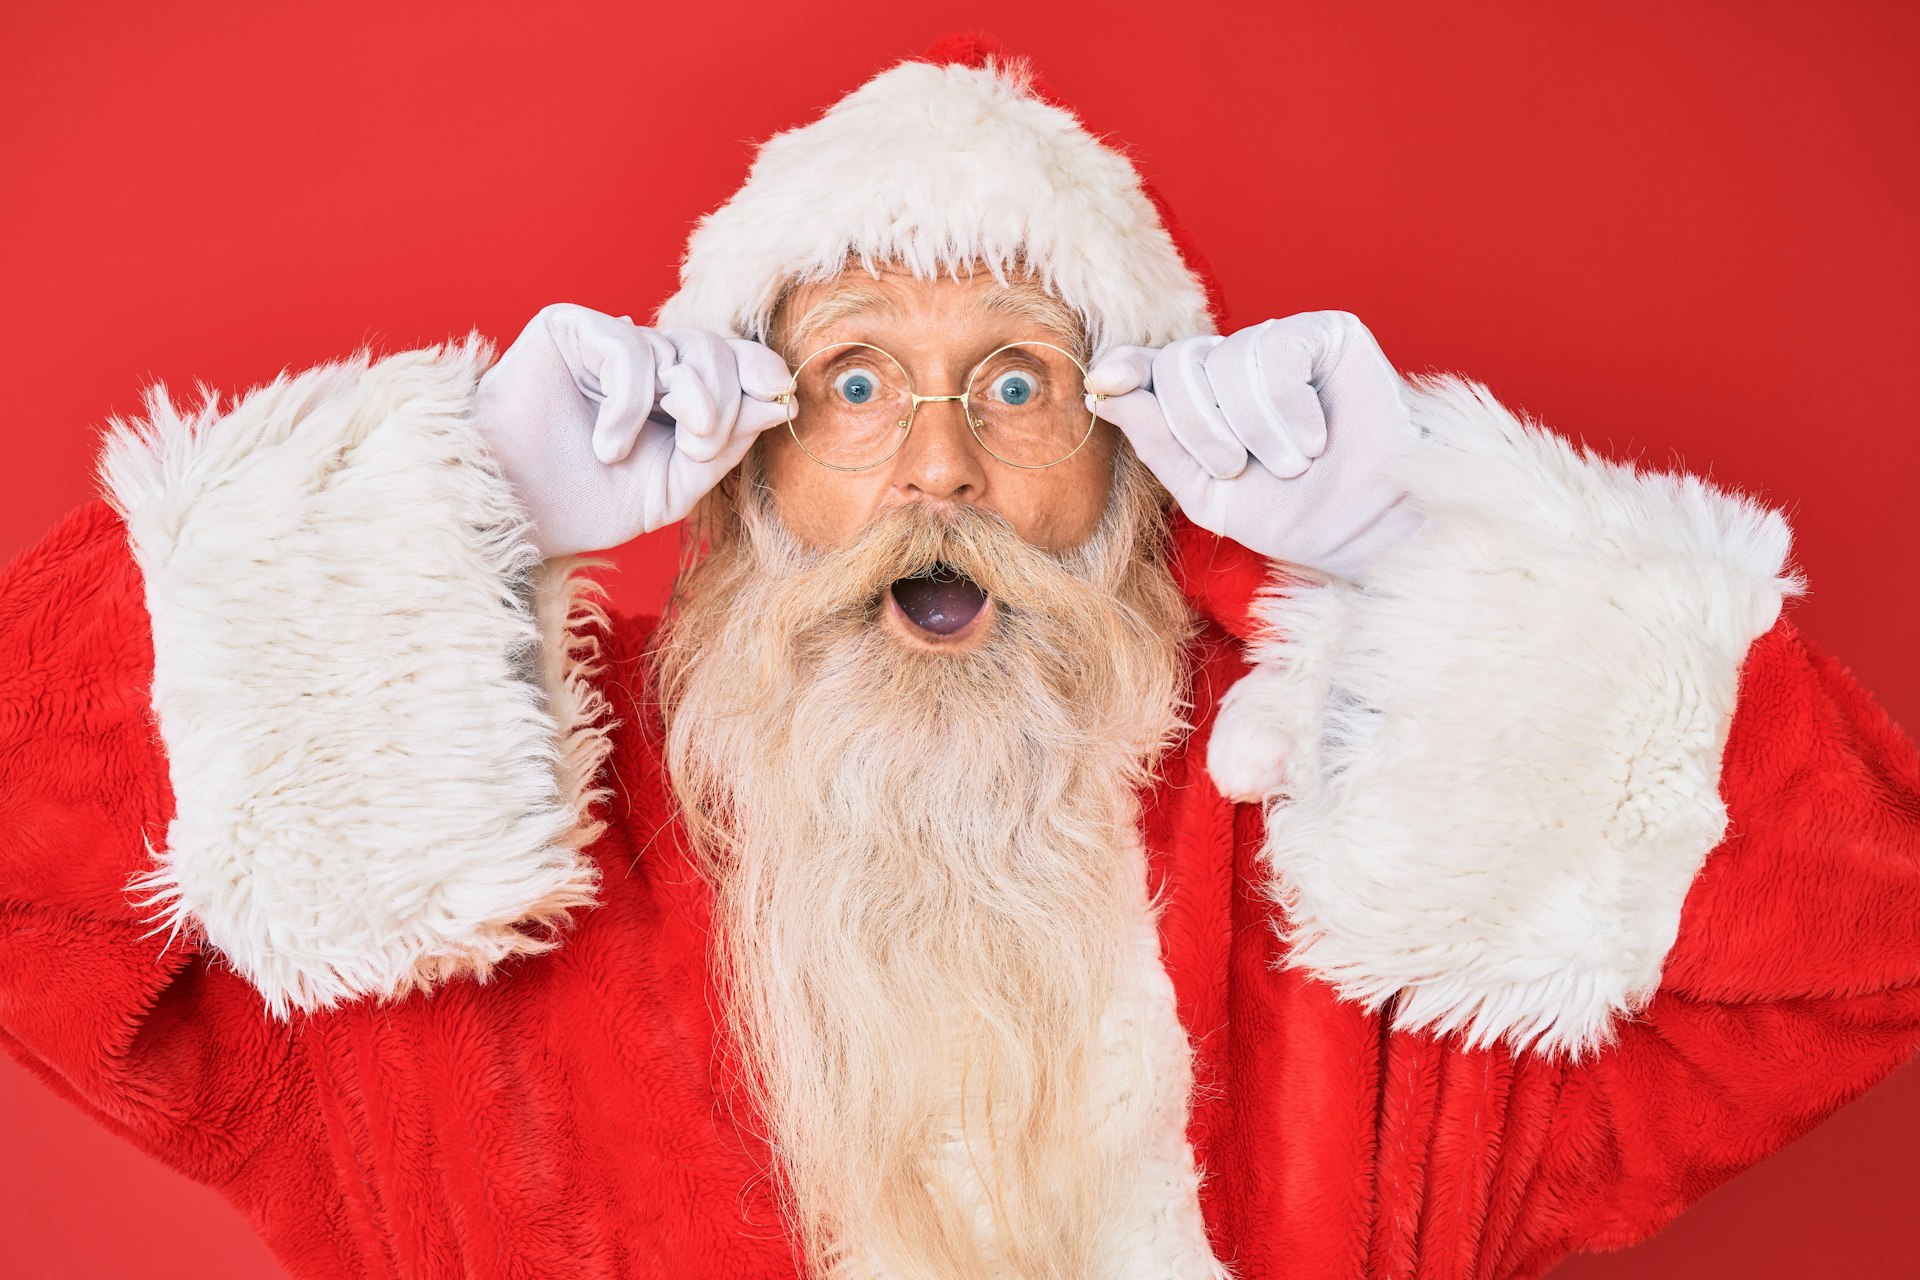 100 of the Funniest Christmas Quotes Worth Sharing